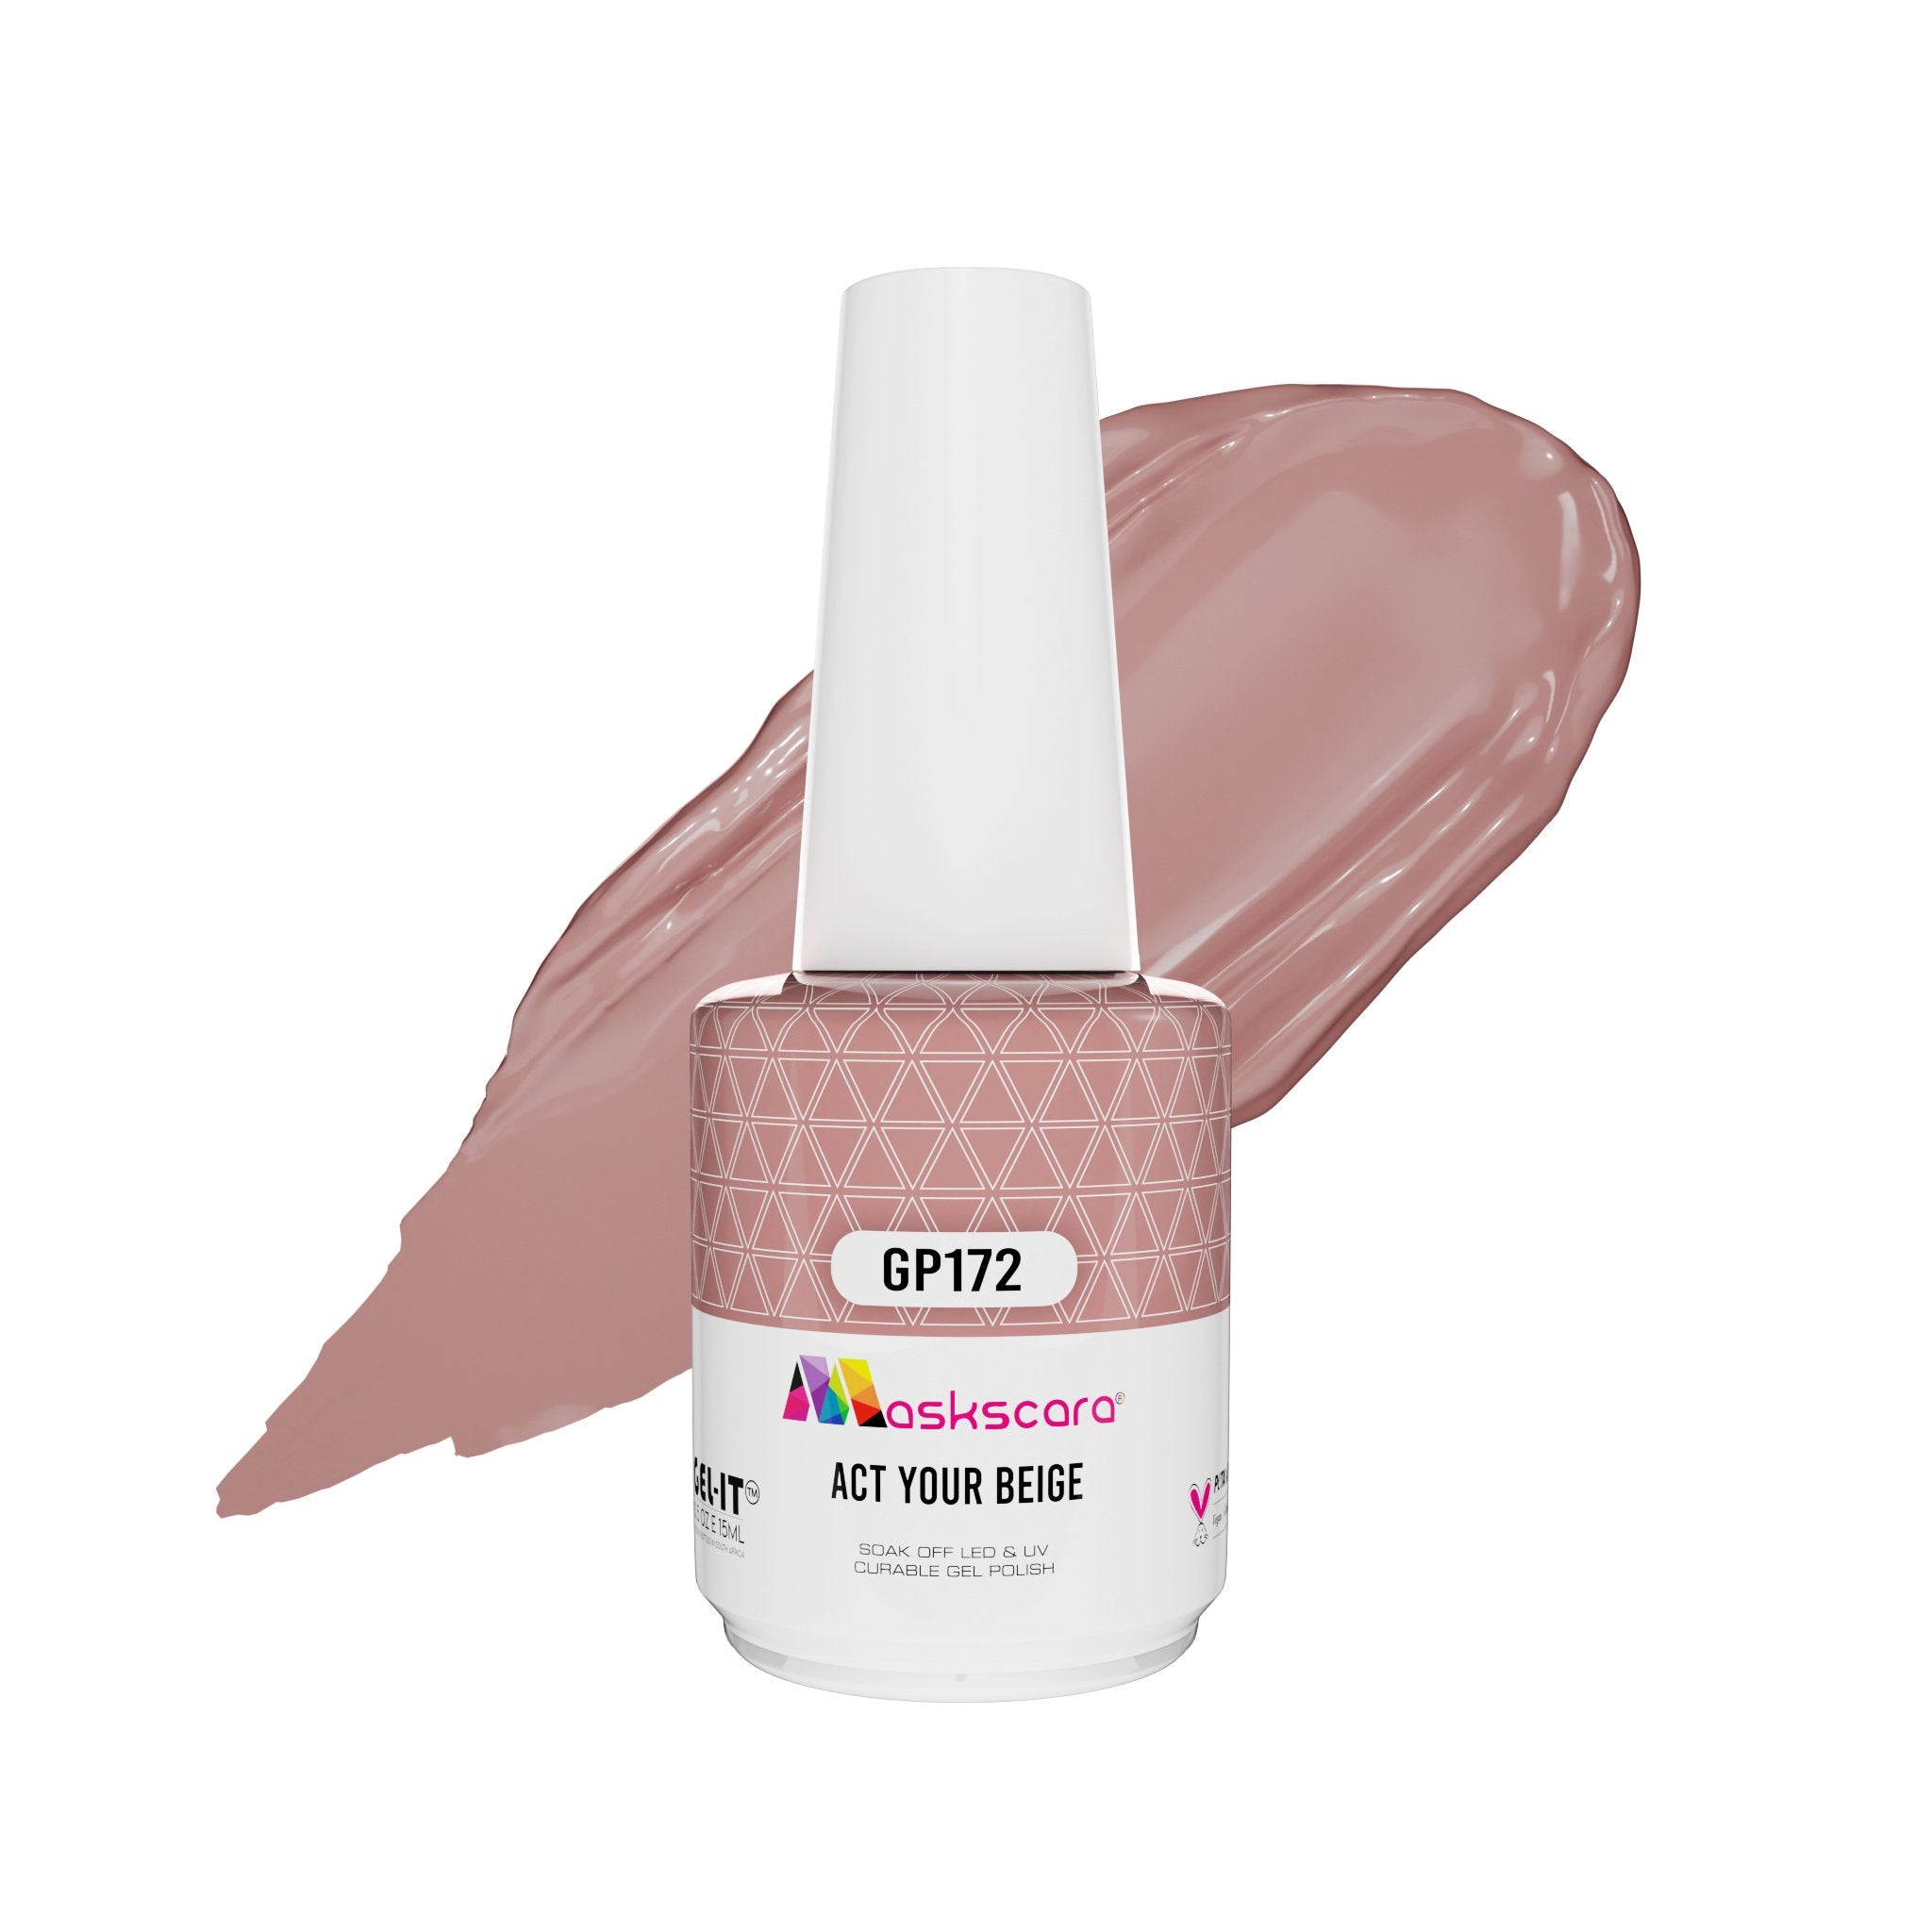 <img scr = “ GP172 Act Your Beige.jpeg” alt = “Cashmere gel polish colour by the brand Maskscara”>